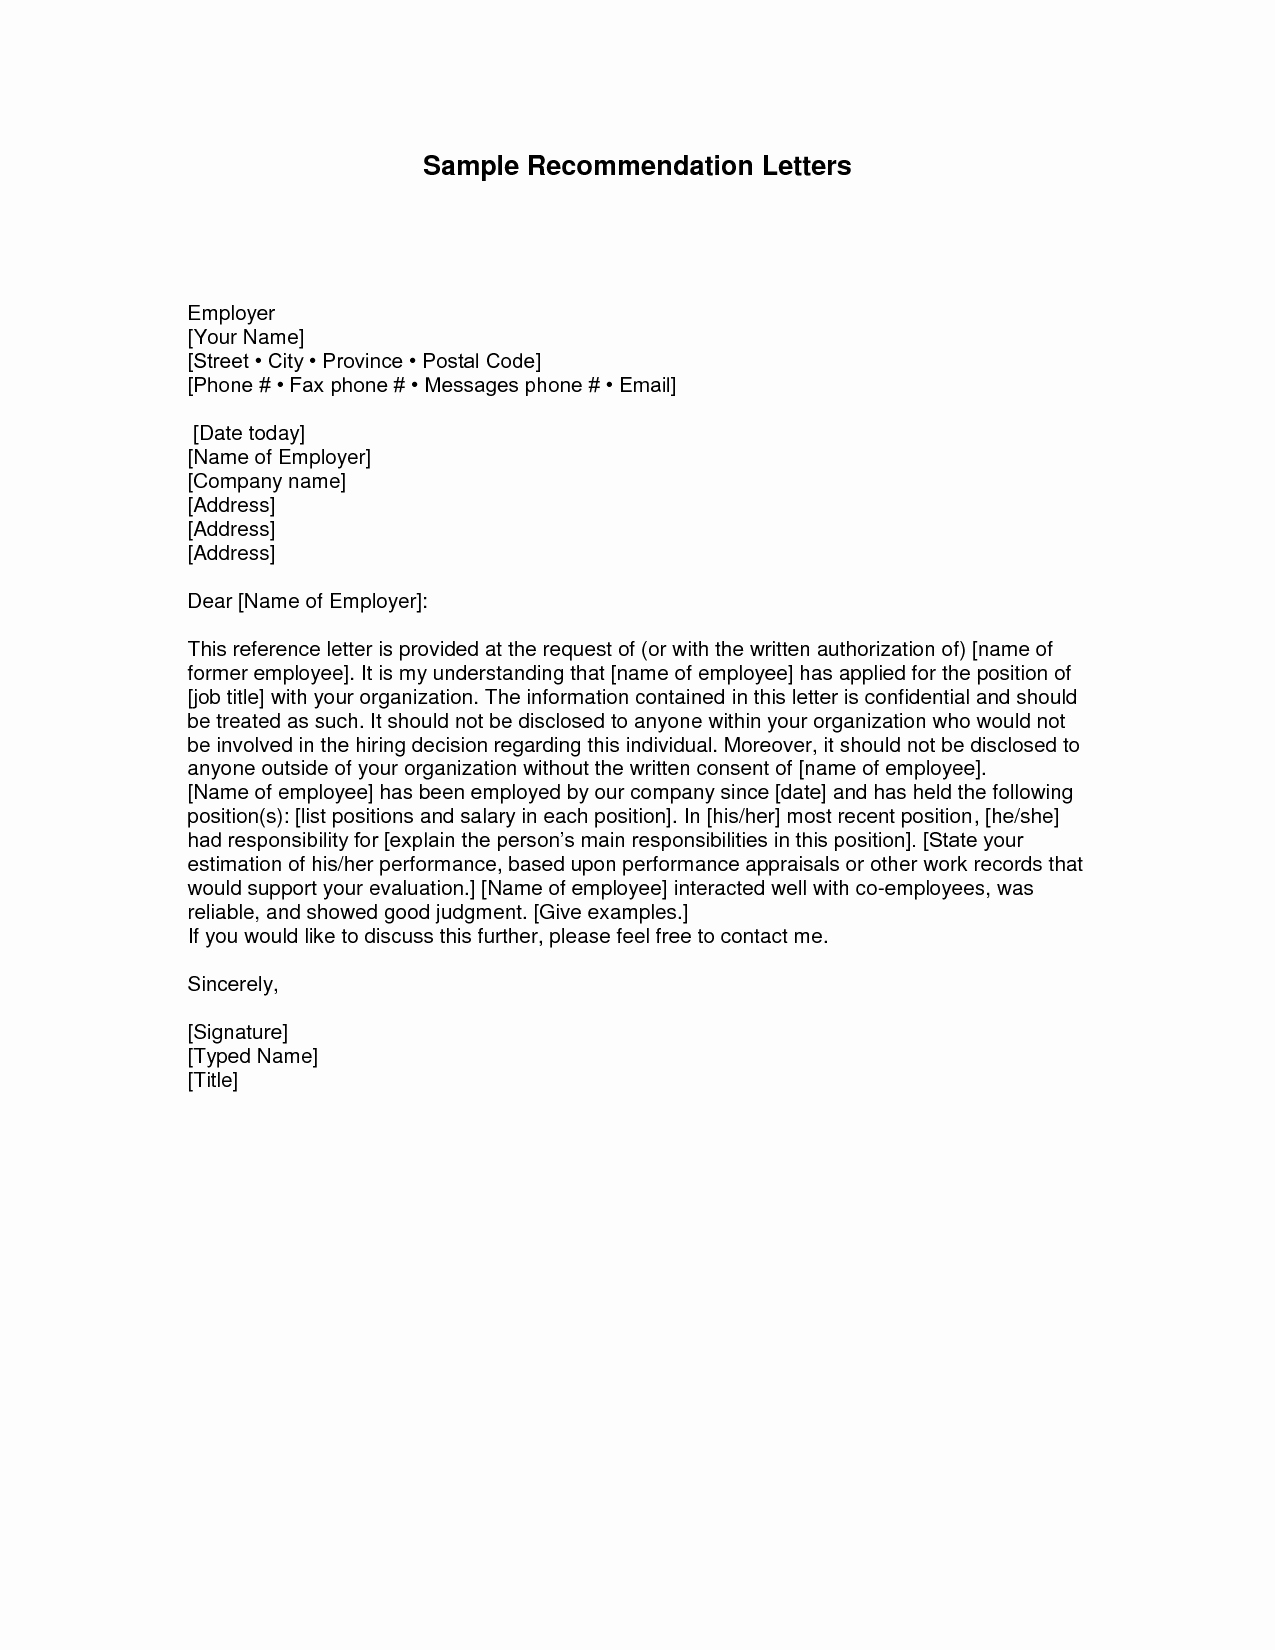 Sample Of Employee Reference Letter Fresh Letters Of Re Mendation Samples